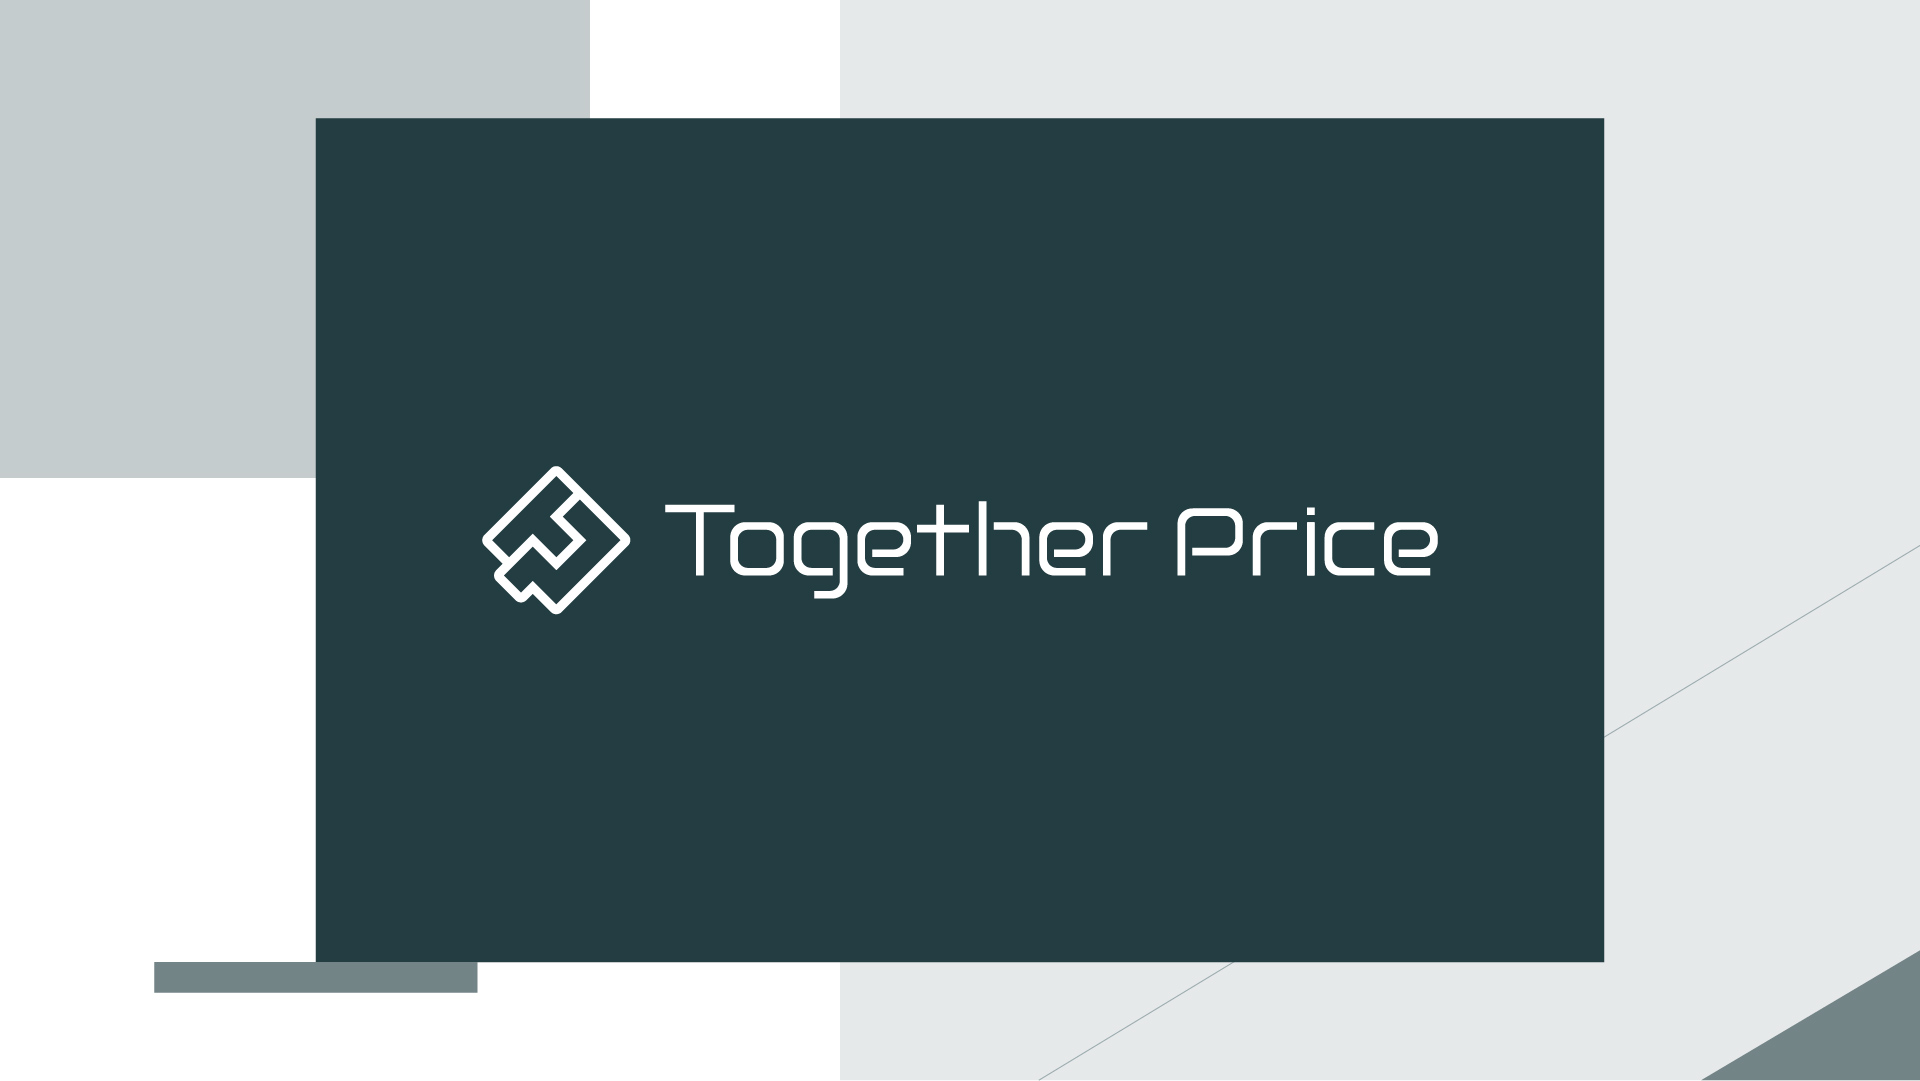 Together Price closes an investment round for 630k €